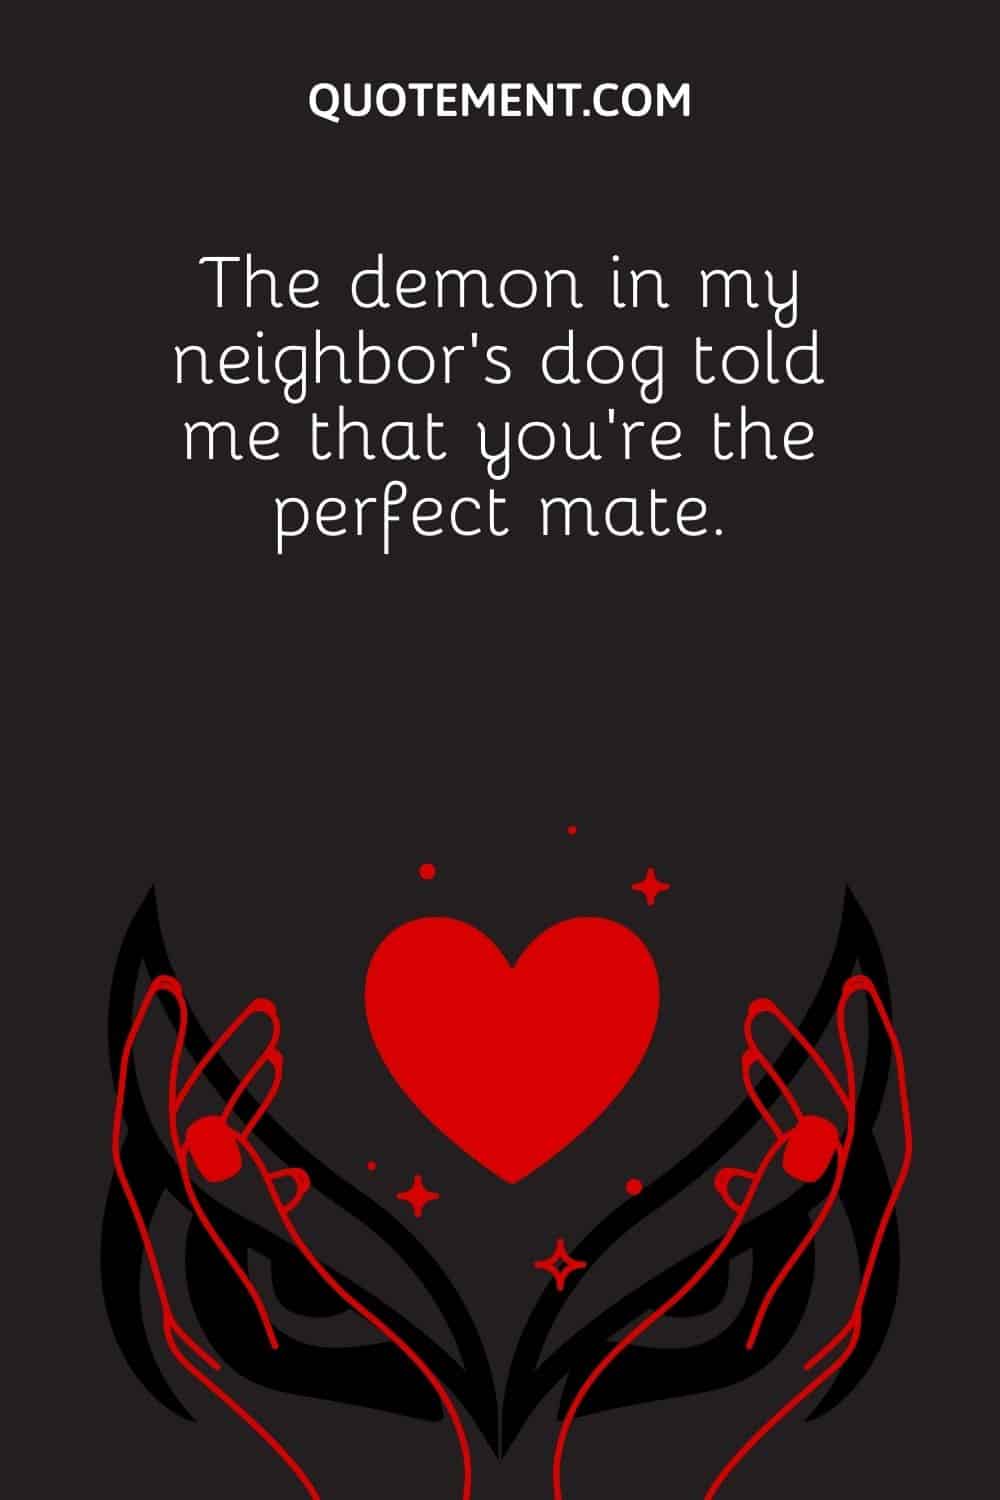 The demon in my neighbor’s dog told me that you’re the perfect mate